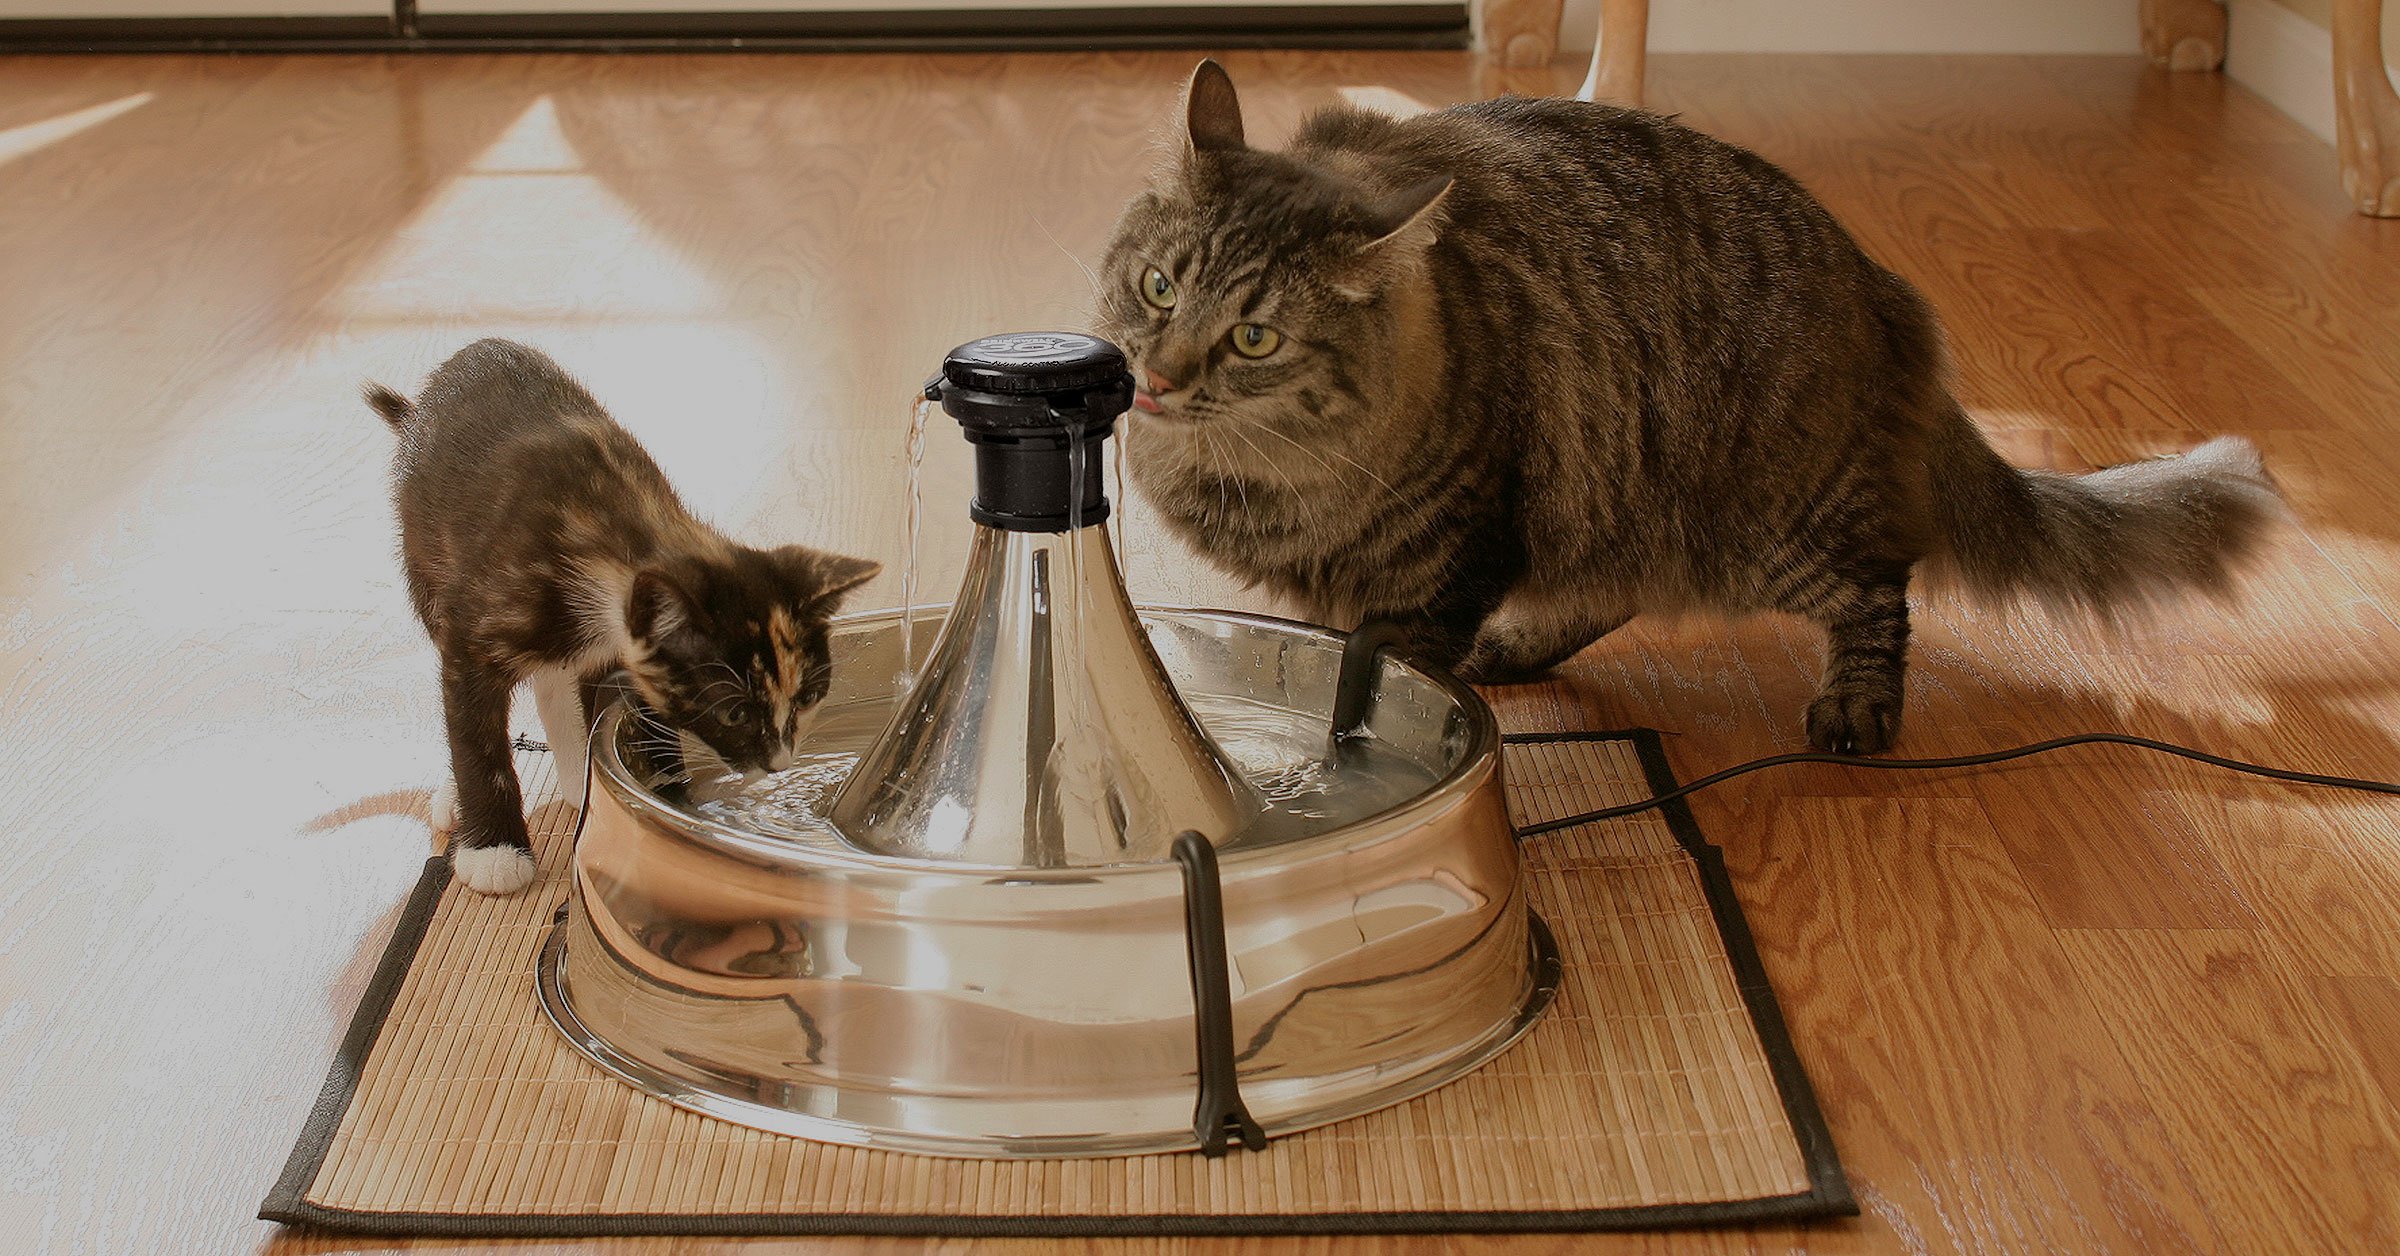 Two cats sharing the 360 ...</div>
					</div>
					
										
									  
					<div class=